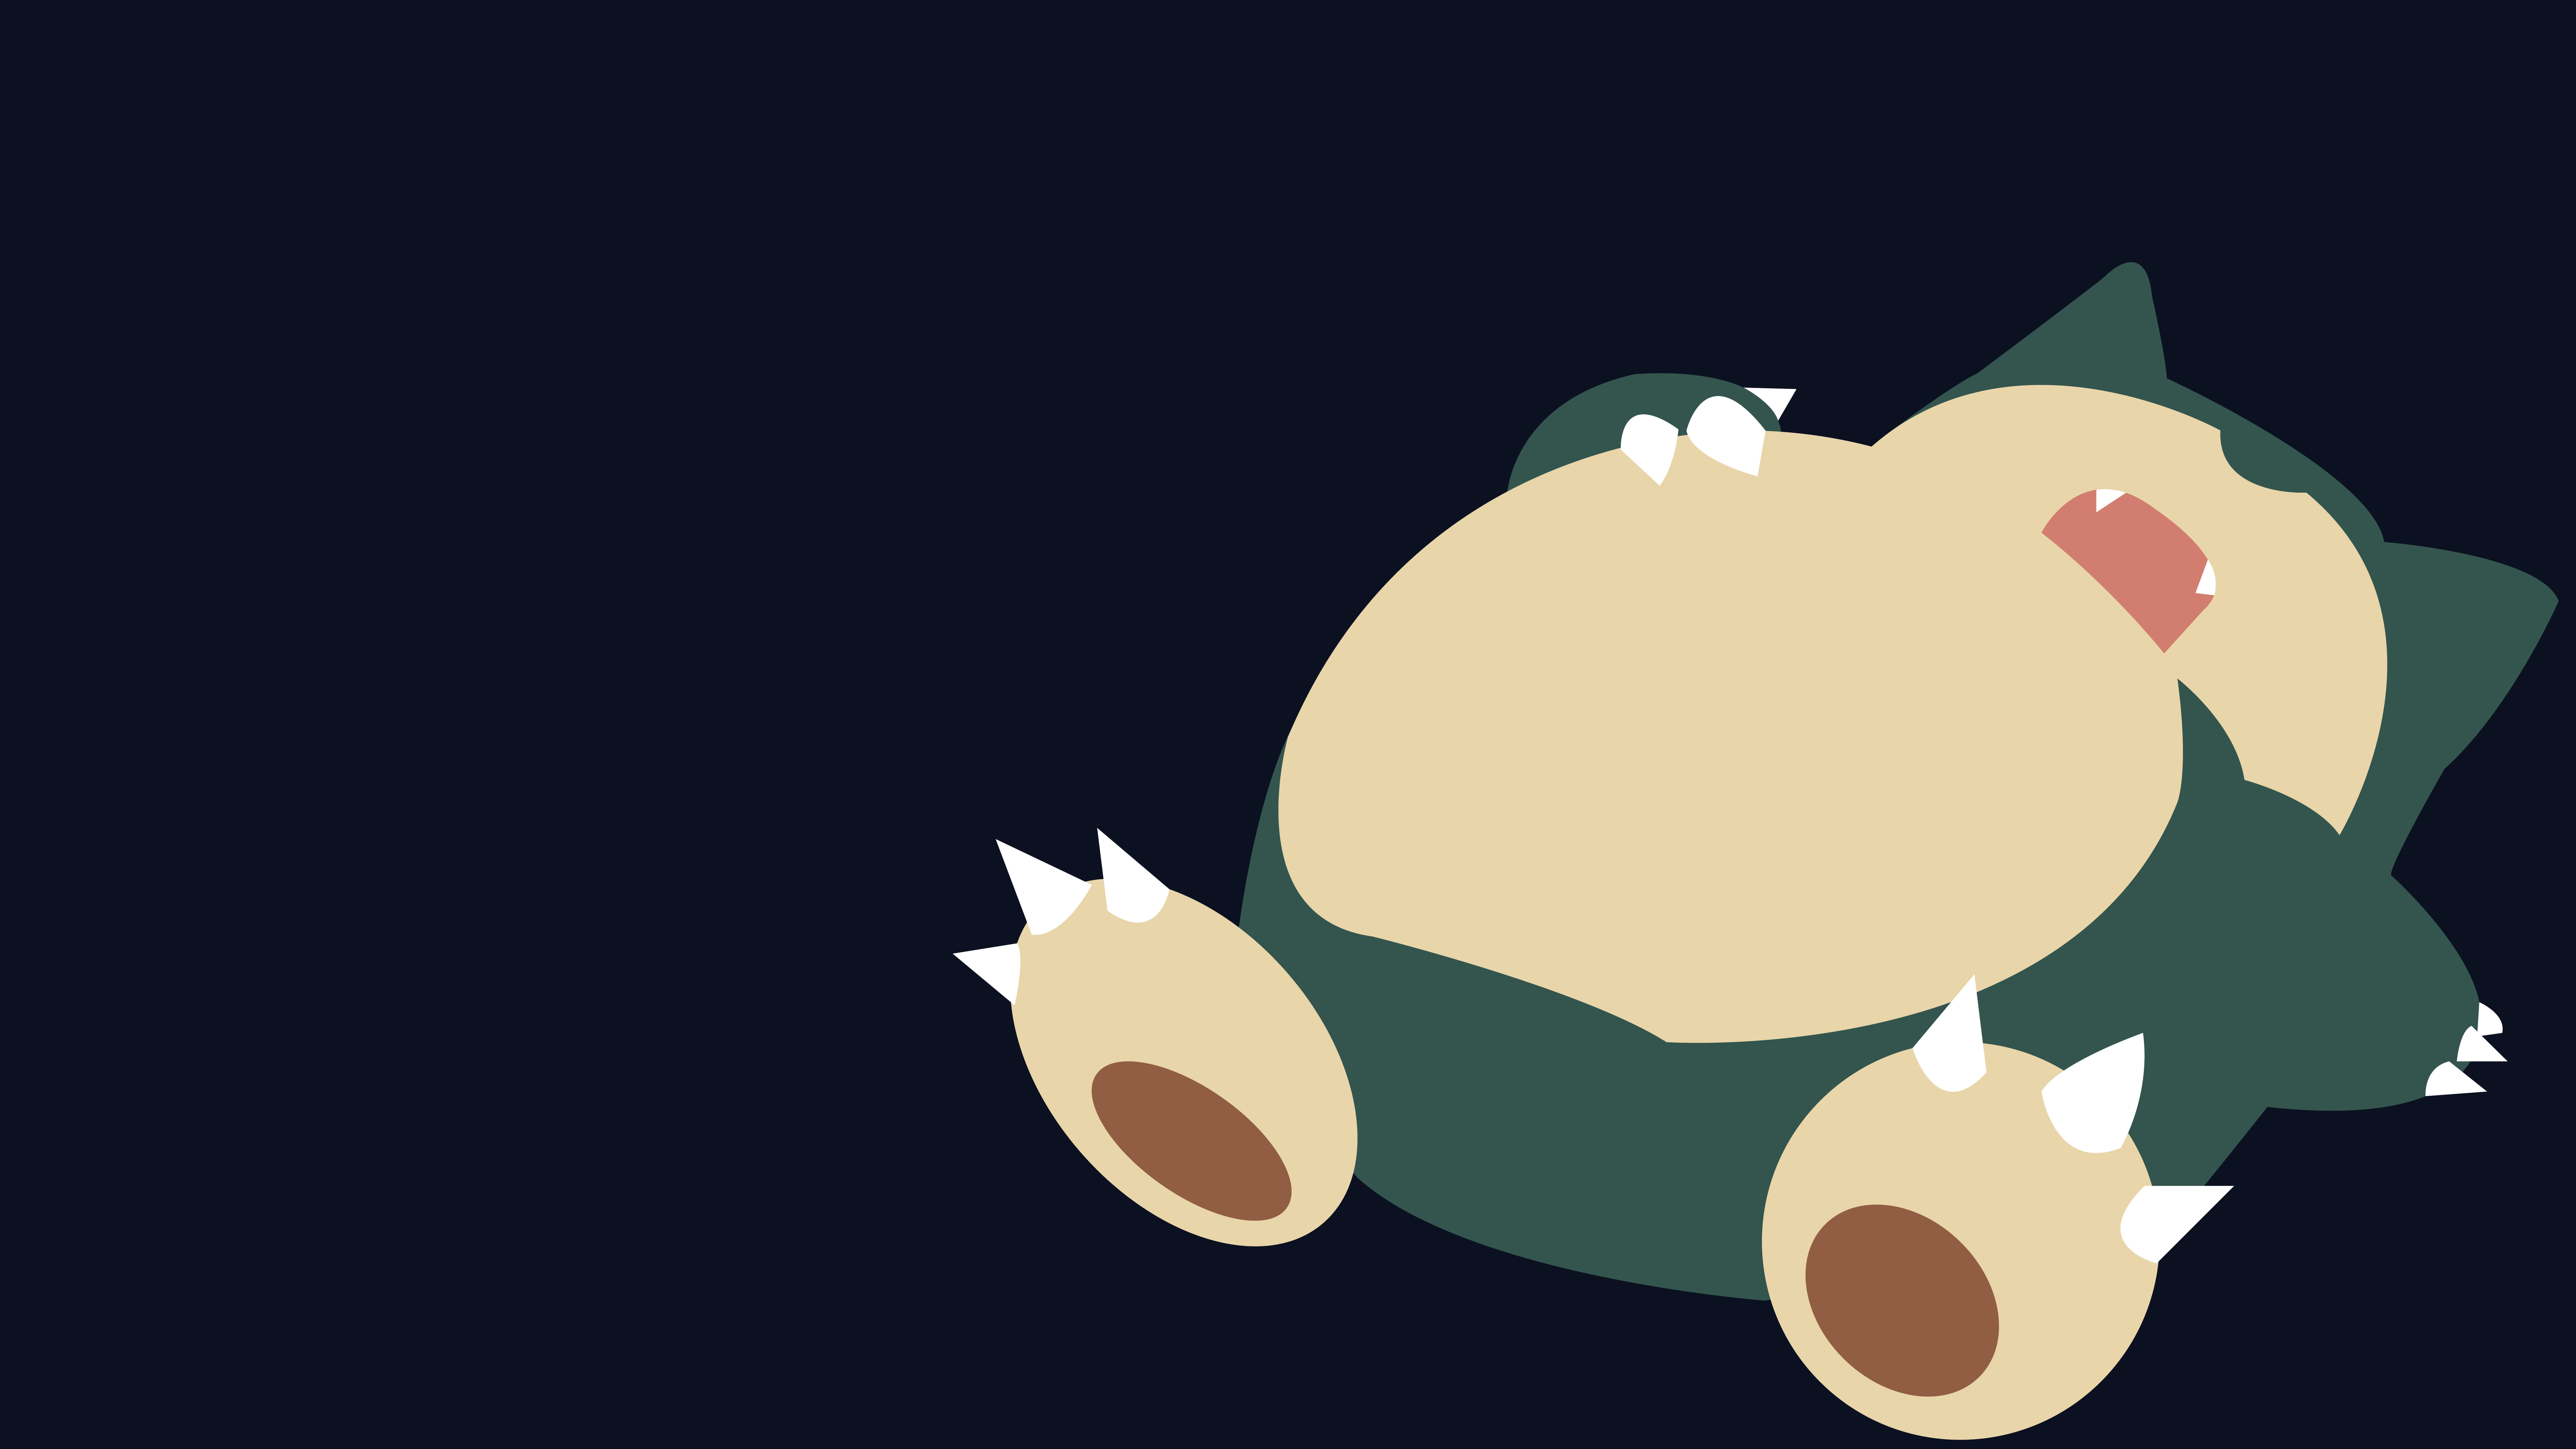 75 Snorlax  Android iPhone Desktop HD Backgrounds  Wallpapers  1080p 4k